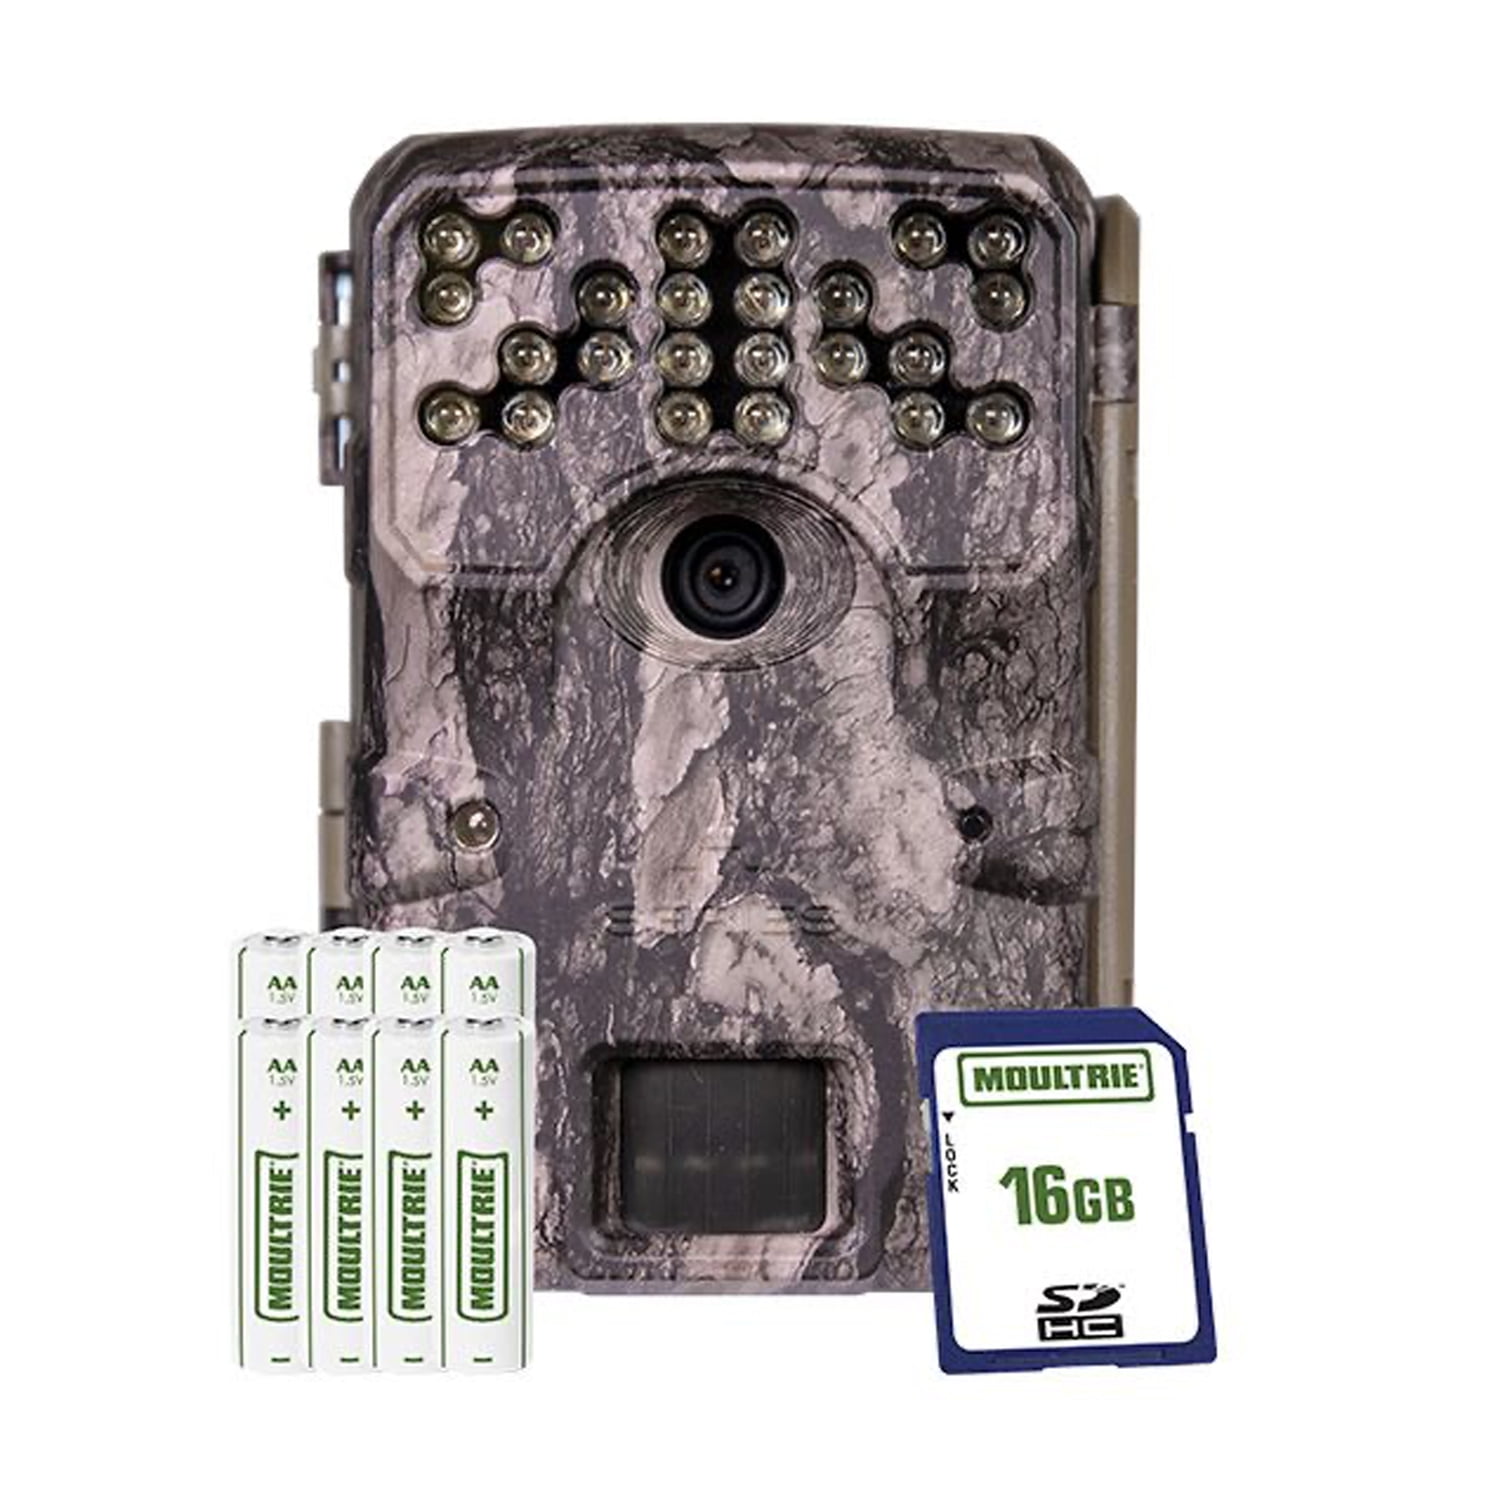 Moultrie Infrared Trail Game Hunting Stake Camera Universal Rotation Steel Tilt 